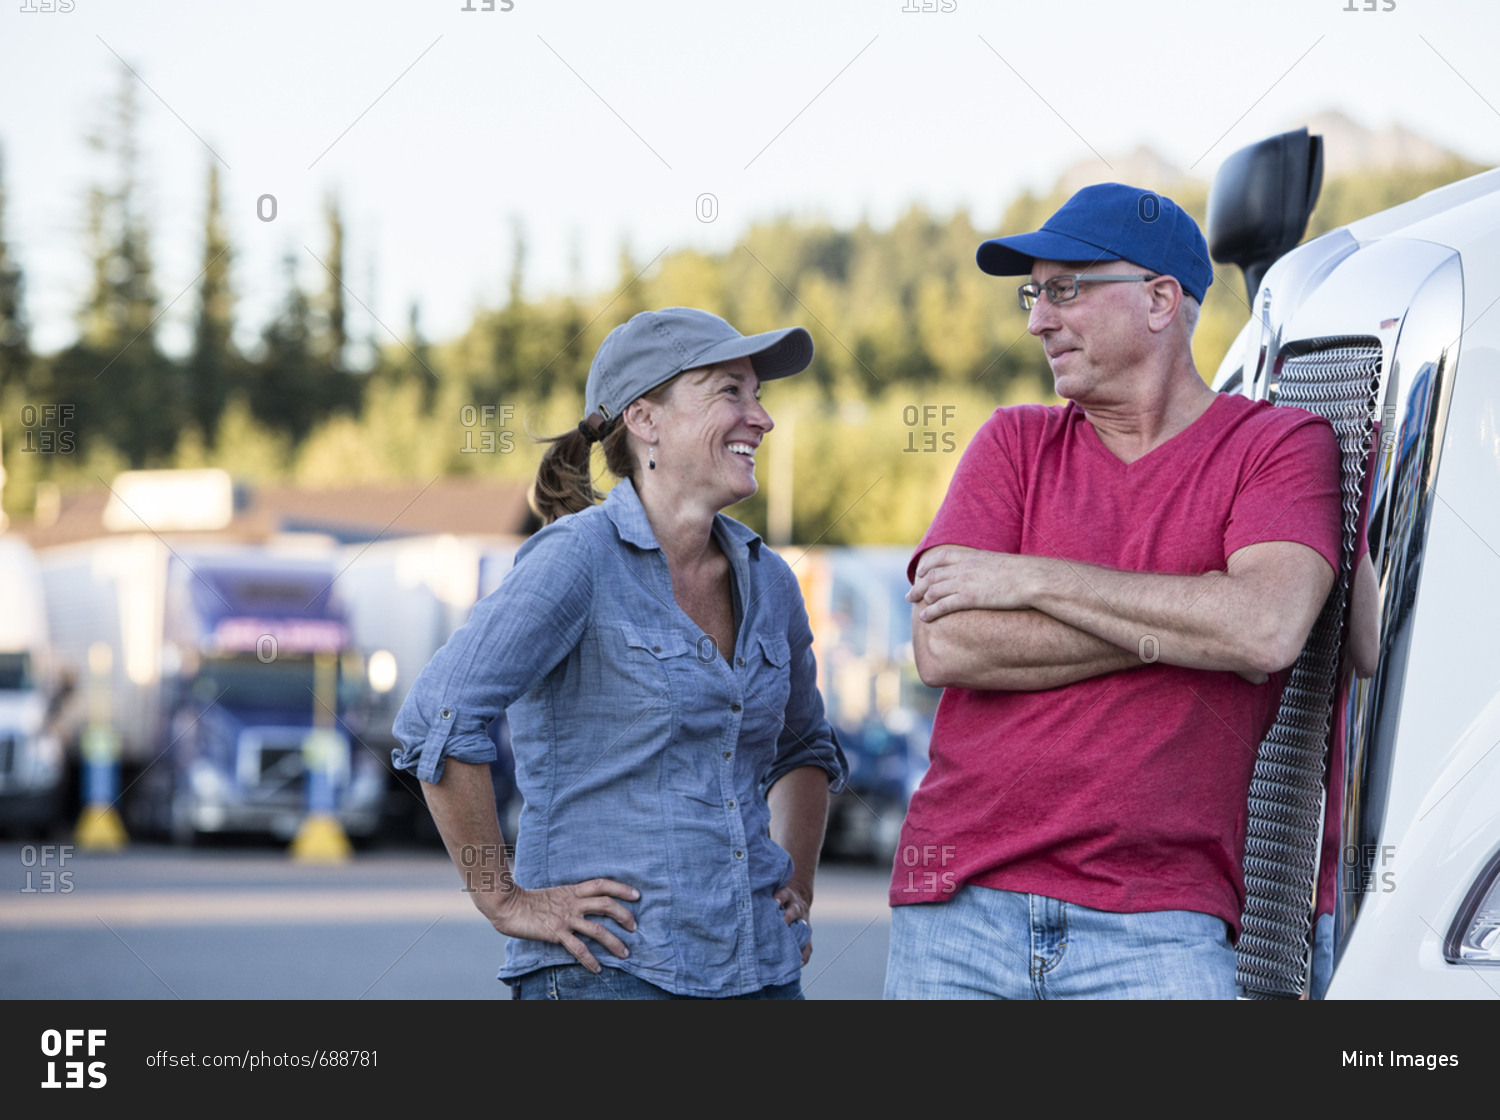 Caucasian man and woman driving team talking in front of a large truck at a truck stop